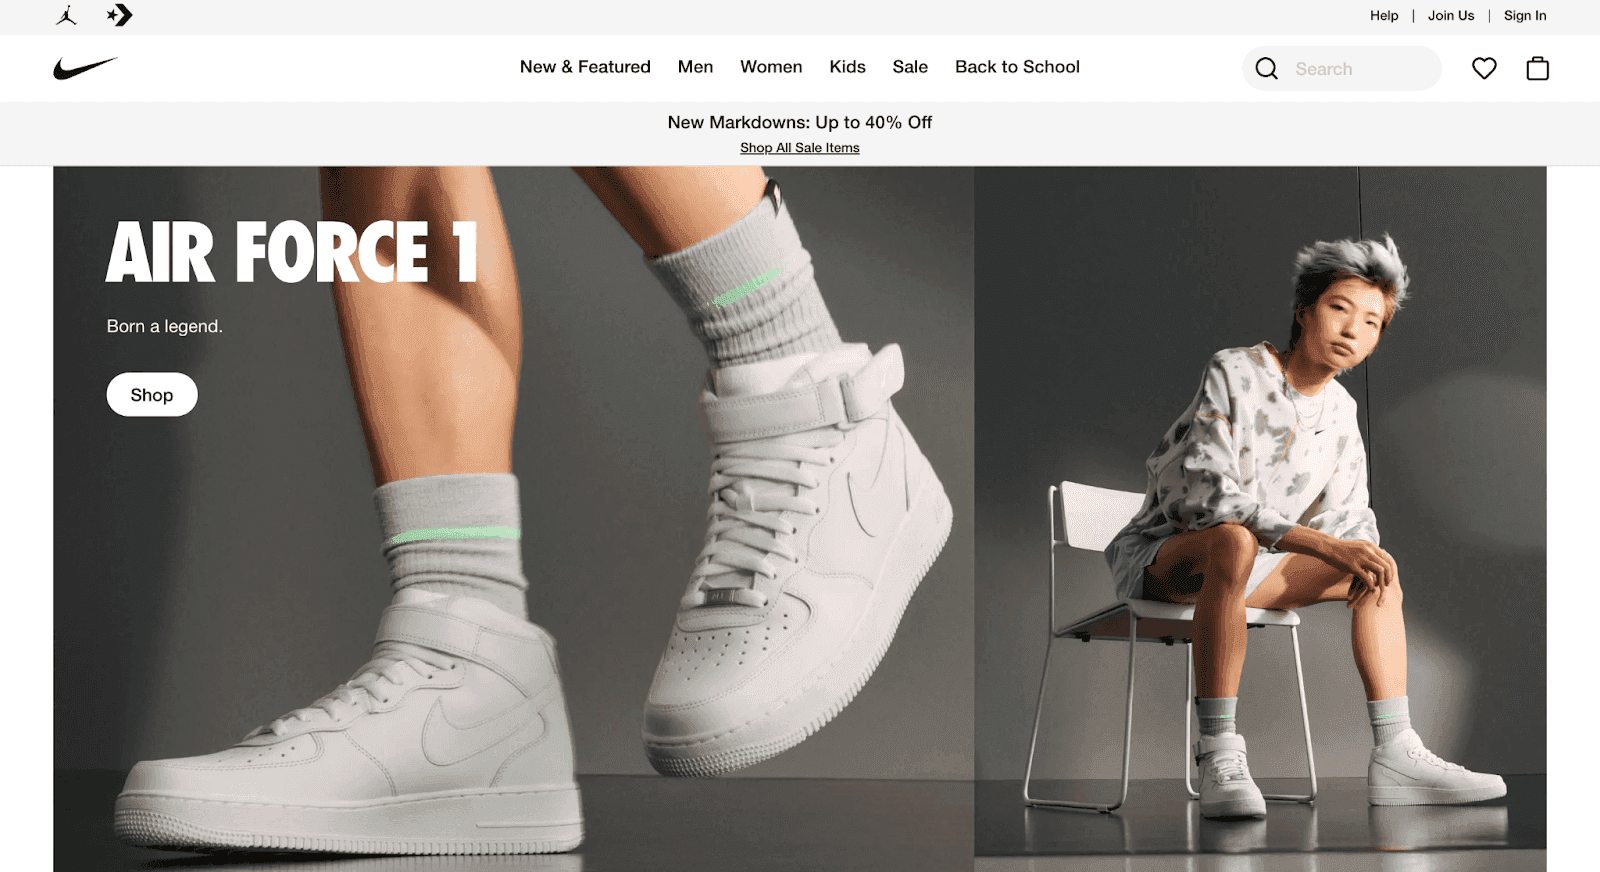 Nike Air Force One landing page